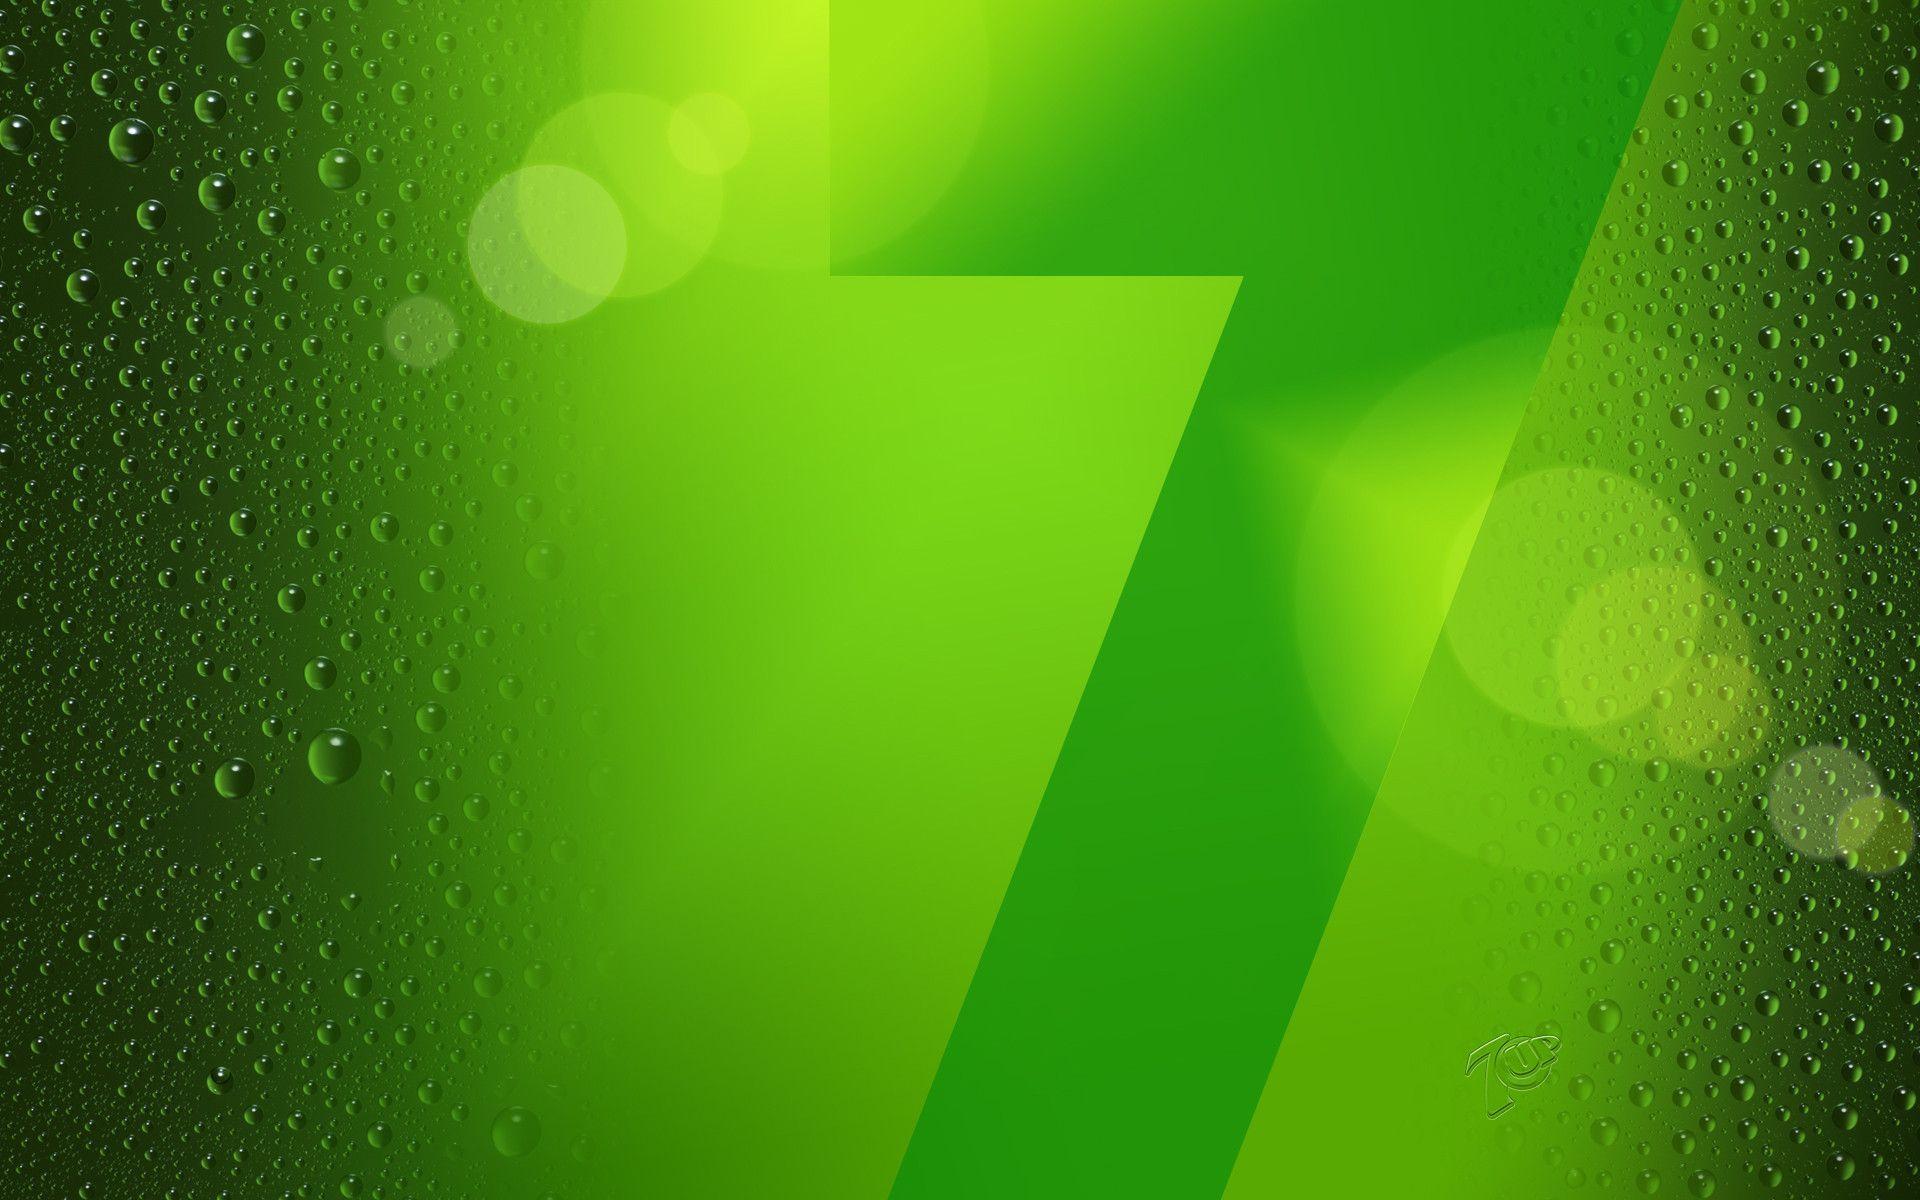 Official Windows 7 Theme: 7up